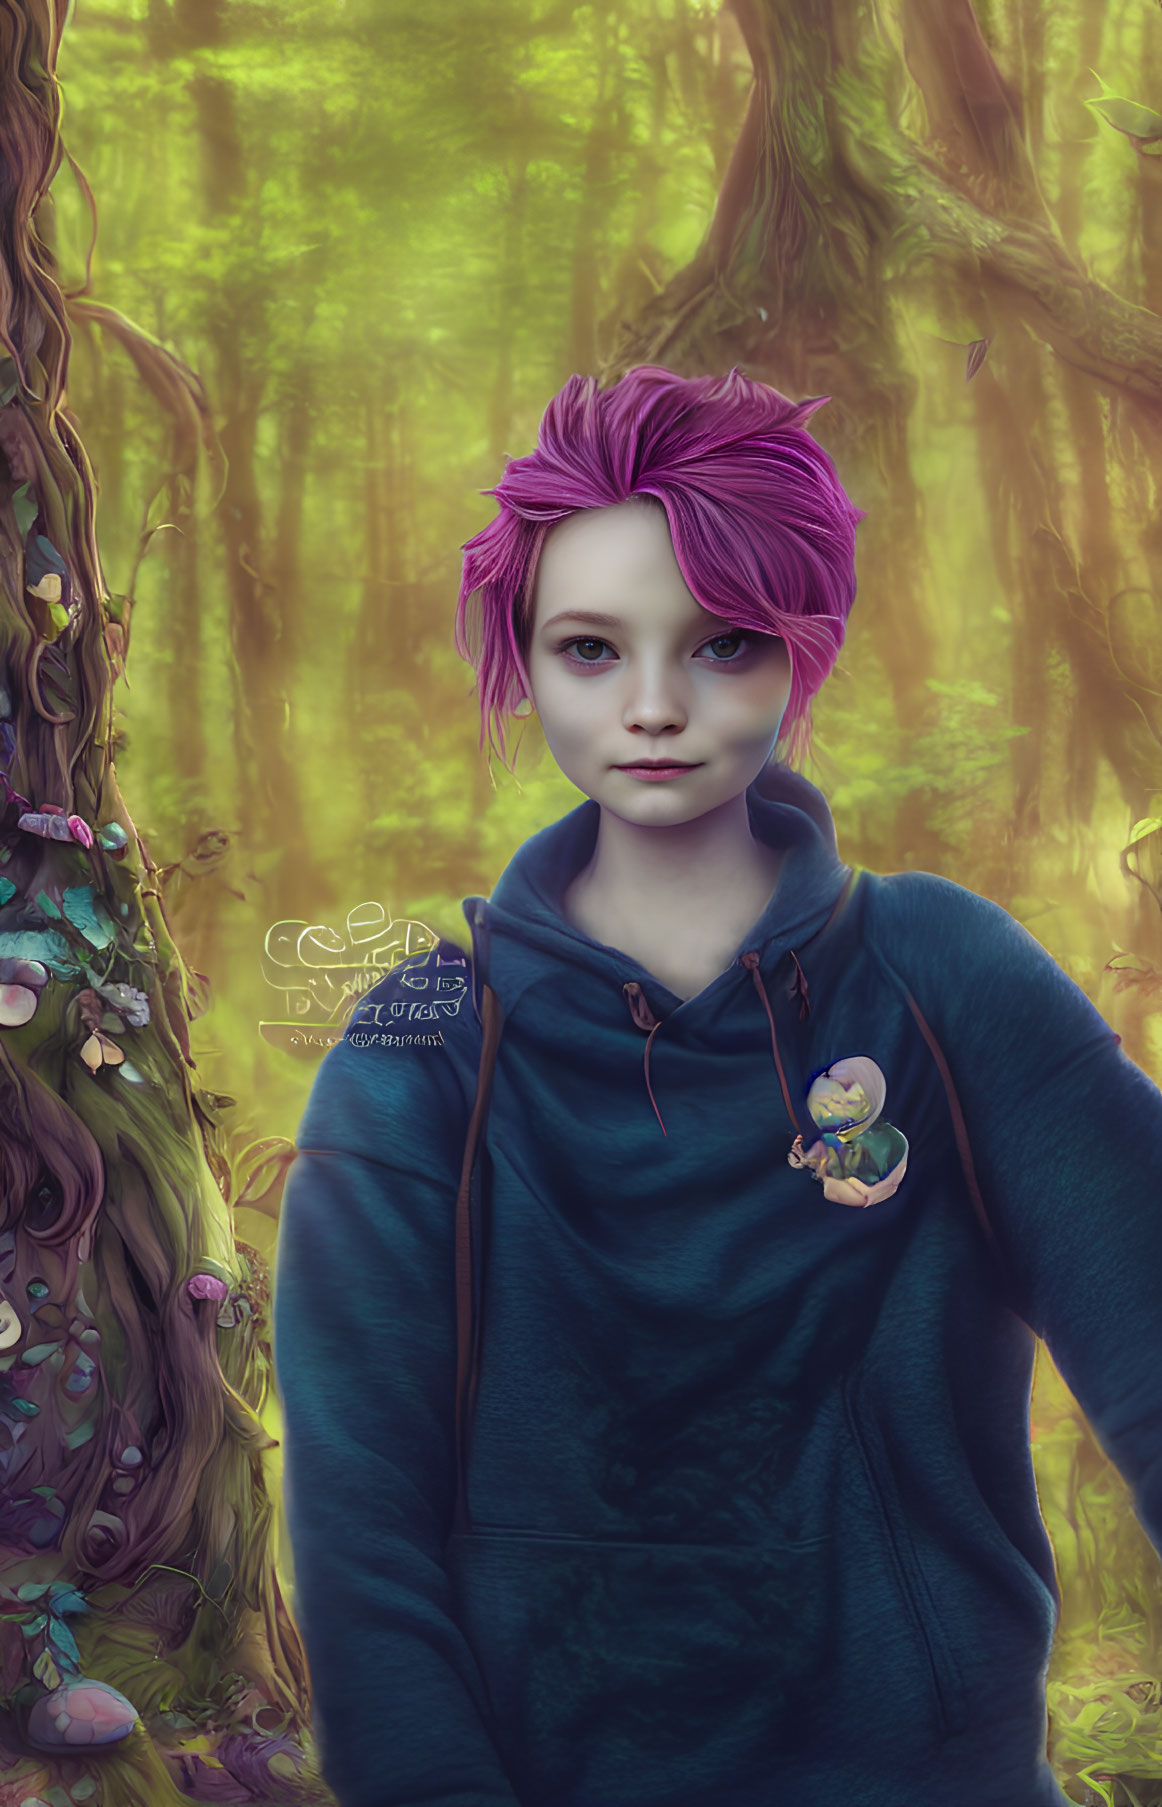 Person with Short Purple Hair in Blue Hoodie in Fantastical Forest